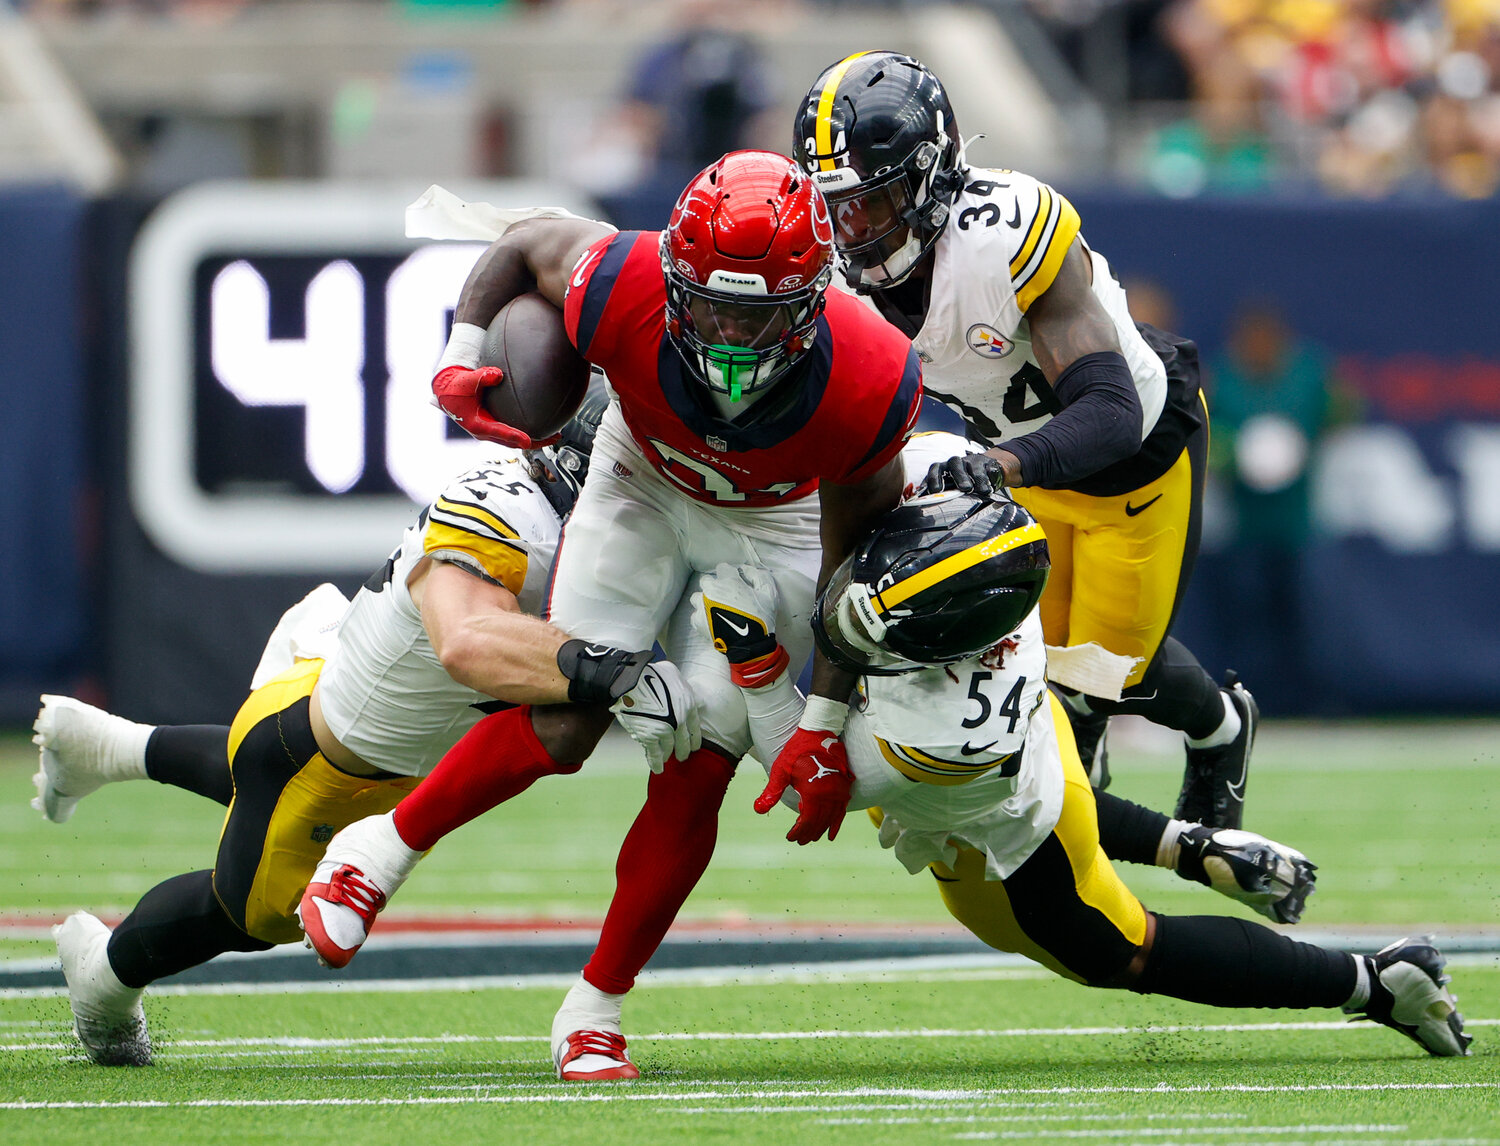 Texans running back Dameon Pierce (31) carries the ball through contact with Steelers linebackers Cole Holcomb (55) and Kwon Alexander (54 during an NFL game between the Texans and the Steelers on October 1, 2023 in Houston.